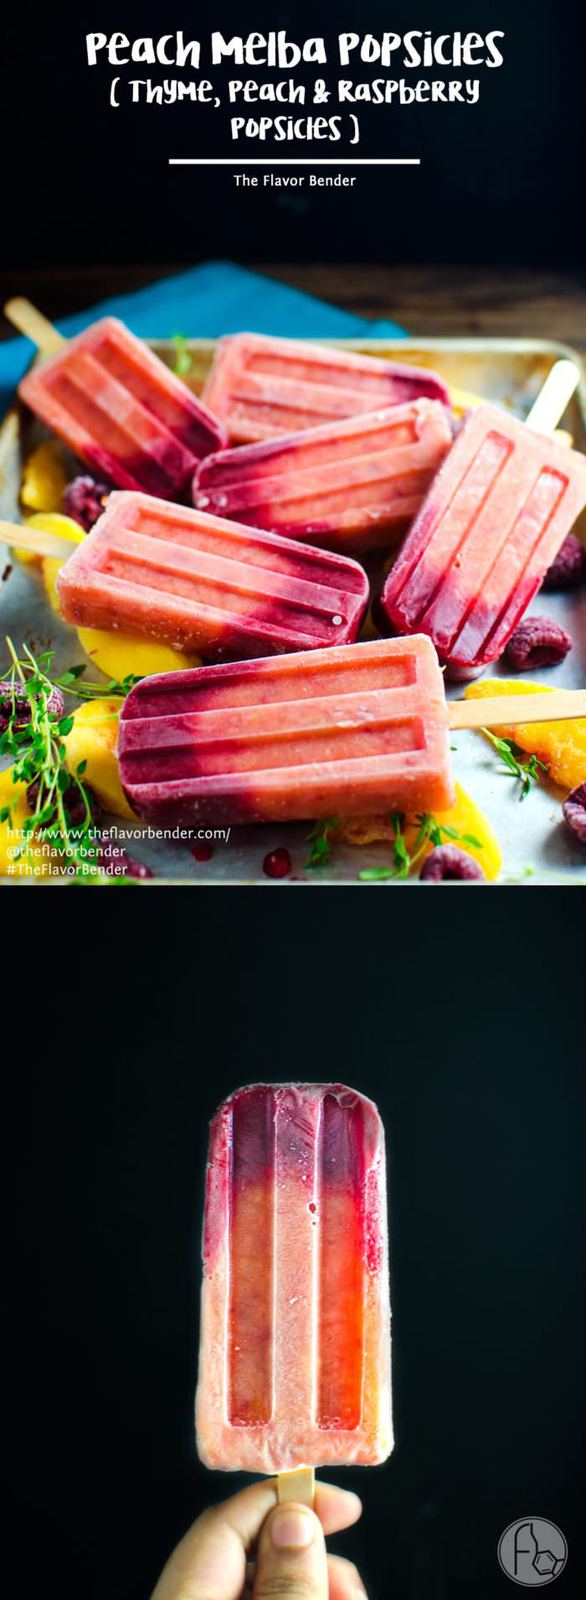 Peach Melba Popsicles (Thyme, Peach, Raspberry Popsicles) - Ripe, juicy peaches, tangy raspberries, and thyme sugar syrup come together to form the juiciest, fruitiest Peach Melba Popsicles that have SUMMER written all over them! So simple to make, so refreshing to have! SAVE for later. CLICK to get the recipe #TheFlavorBender